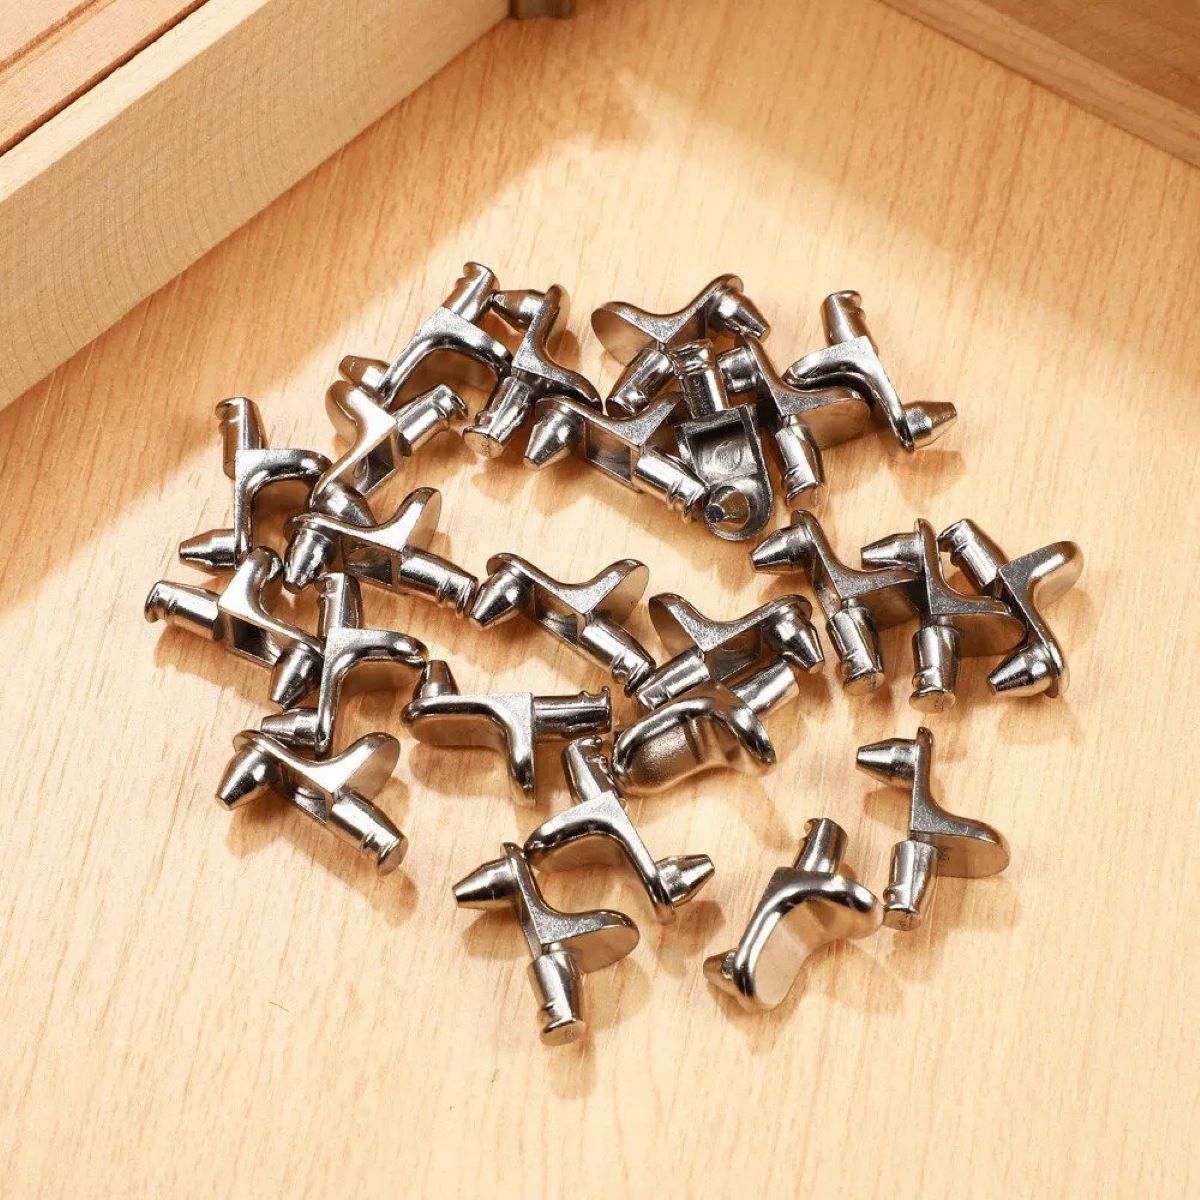 Replacement Shelf Support Pins